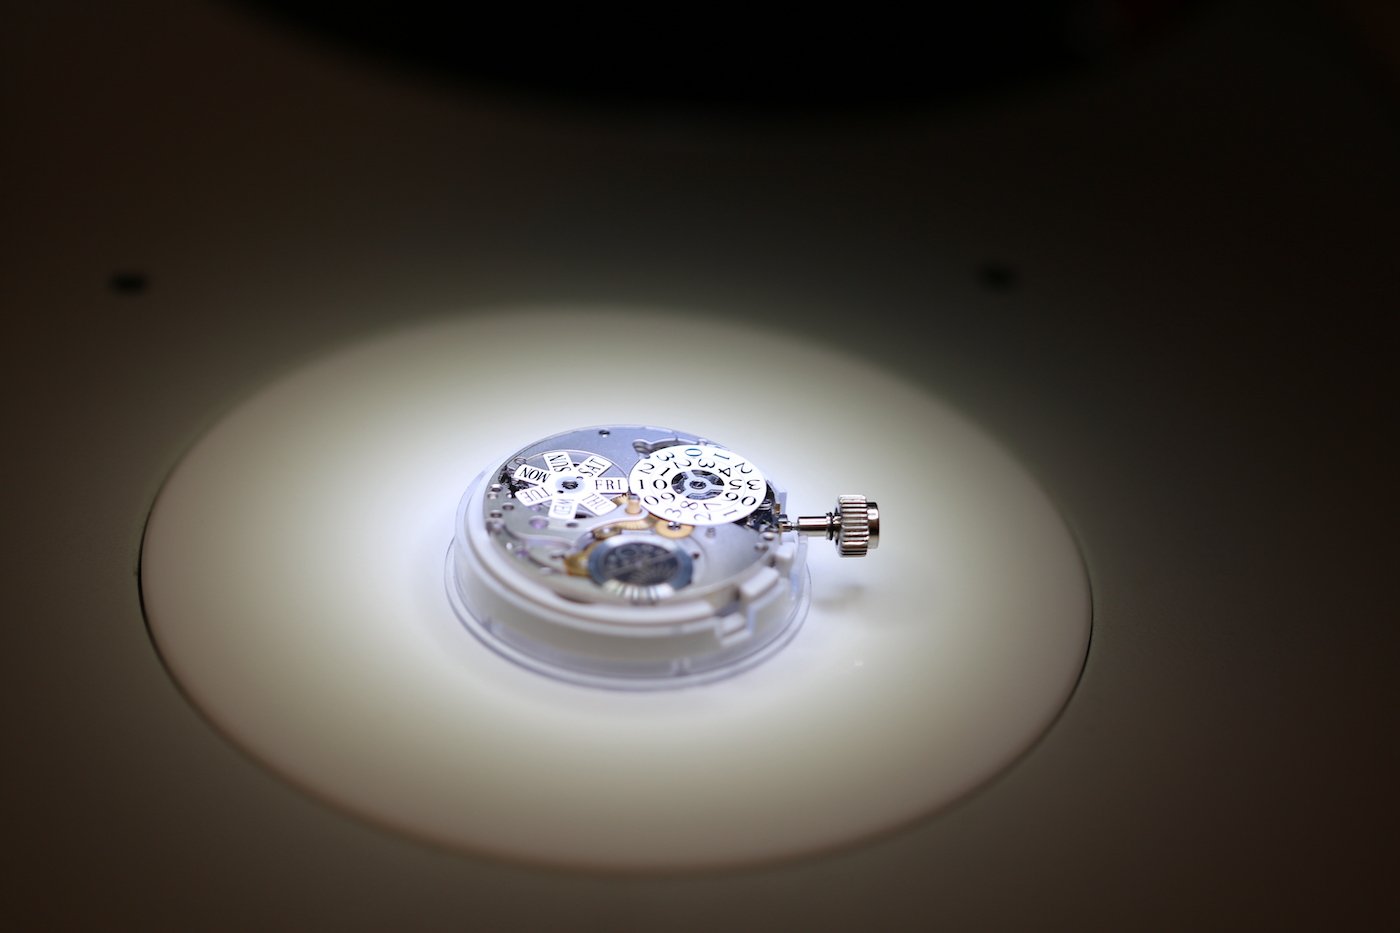 Pequignet: new ambitions for the French watch industry